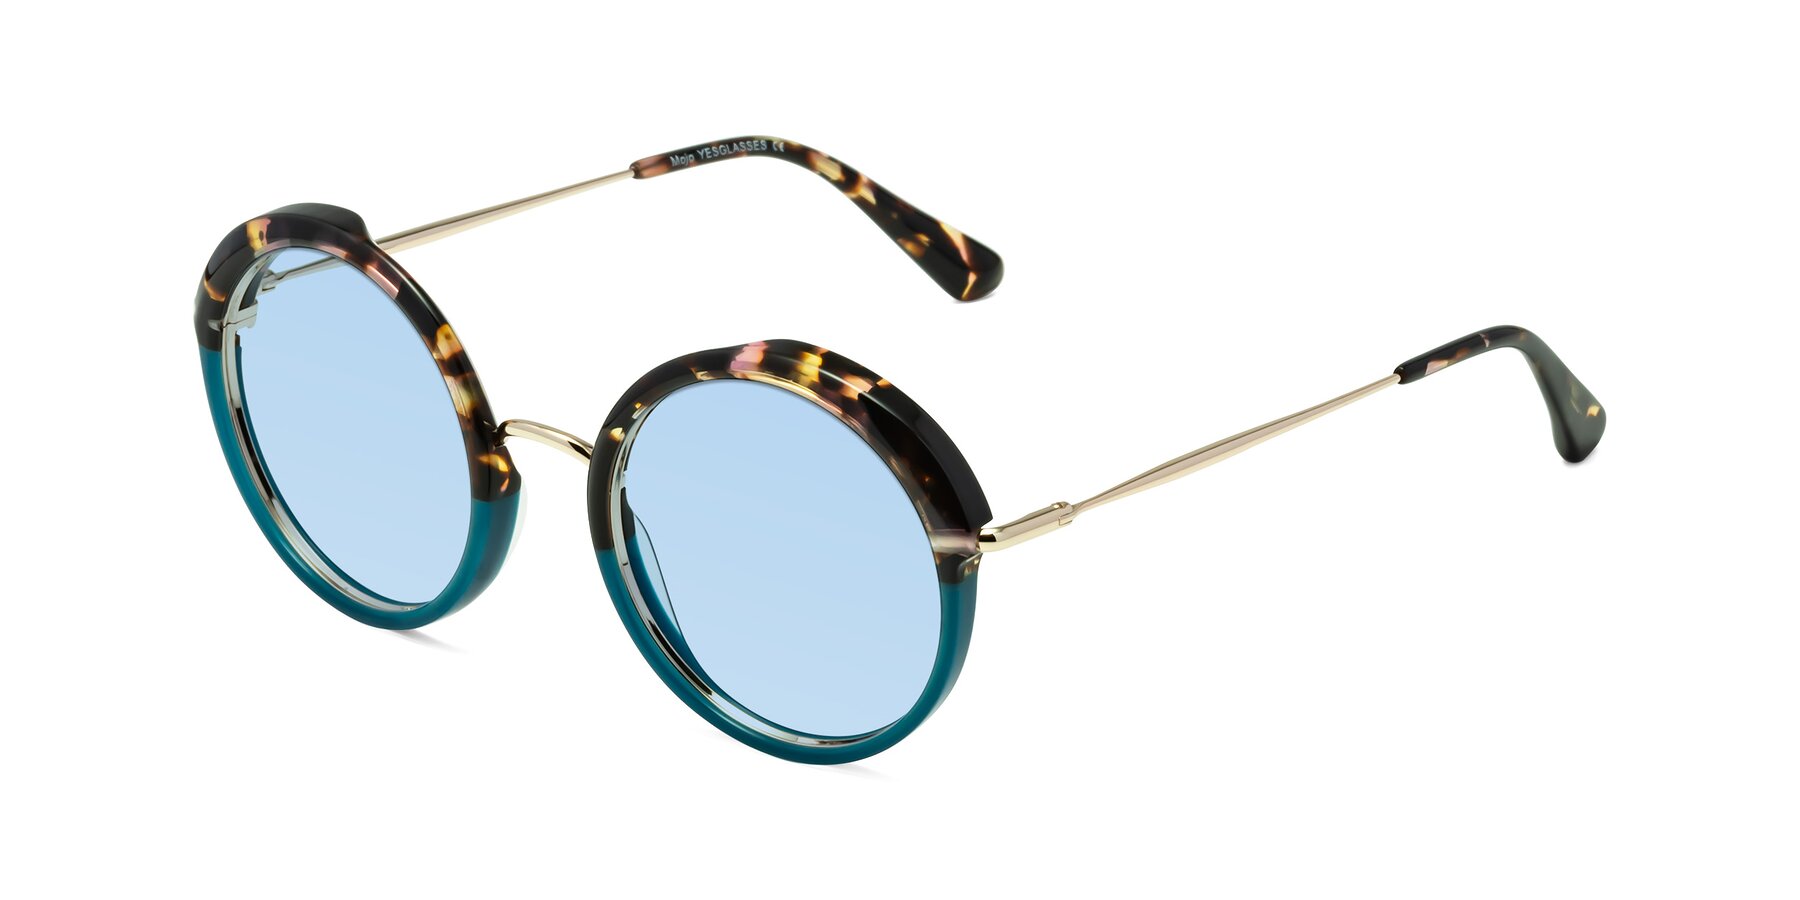 Angle of Mojo in Floral-Teal with Light Blue Tinted Lenses